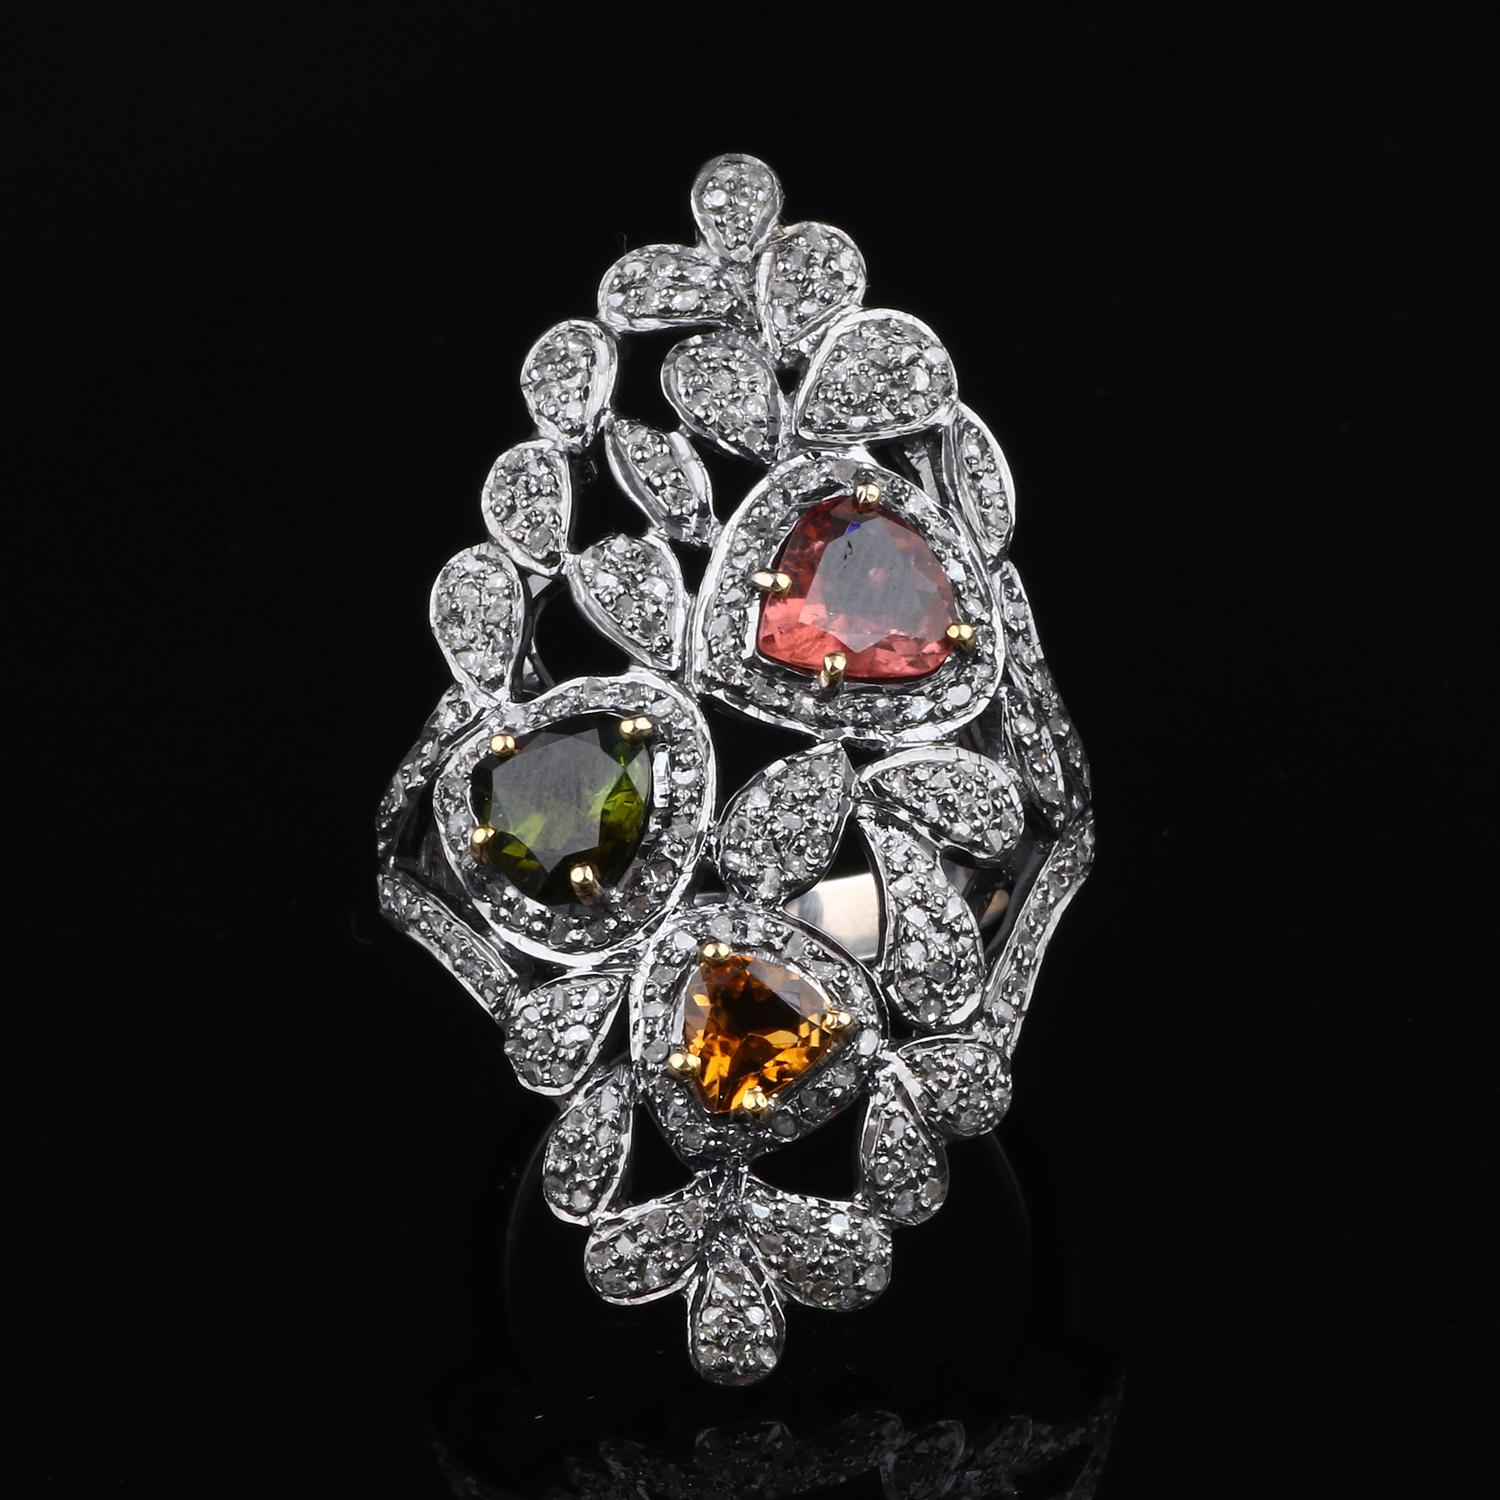 Item details:-

✦ SKU:- ESRG00200

✦ Material :- Silver
✦ Gemstone Specification:-
✧ Diamond
✧ Citrine, Multi Tourmaline

✦ Approx. Diamond Weight : 0.8
✦ Approx. Silver Weight : 8.99
✦ Approx. Gross Weight : 9.6

Ring Size (US): 7

You will Get the